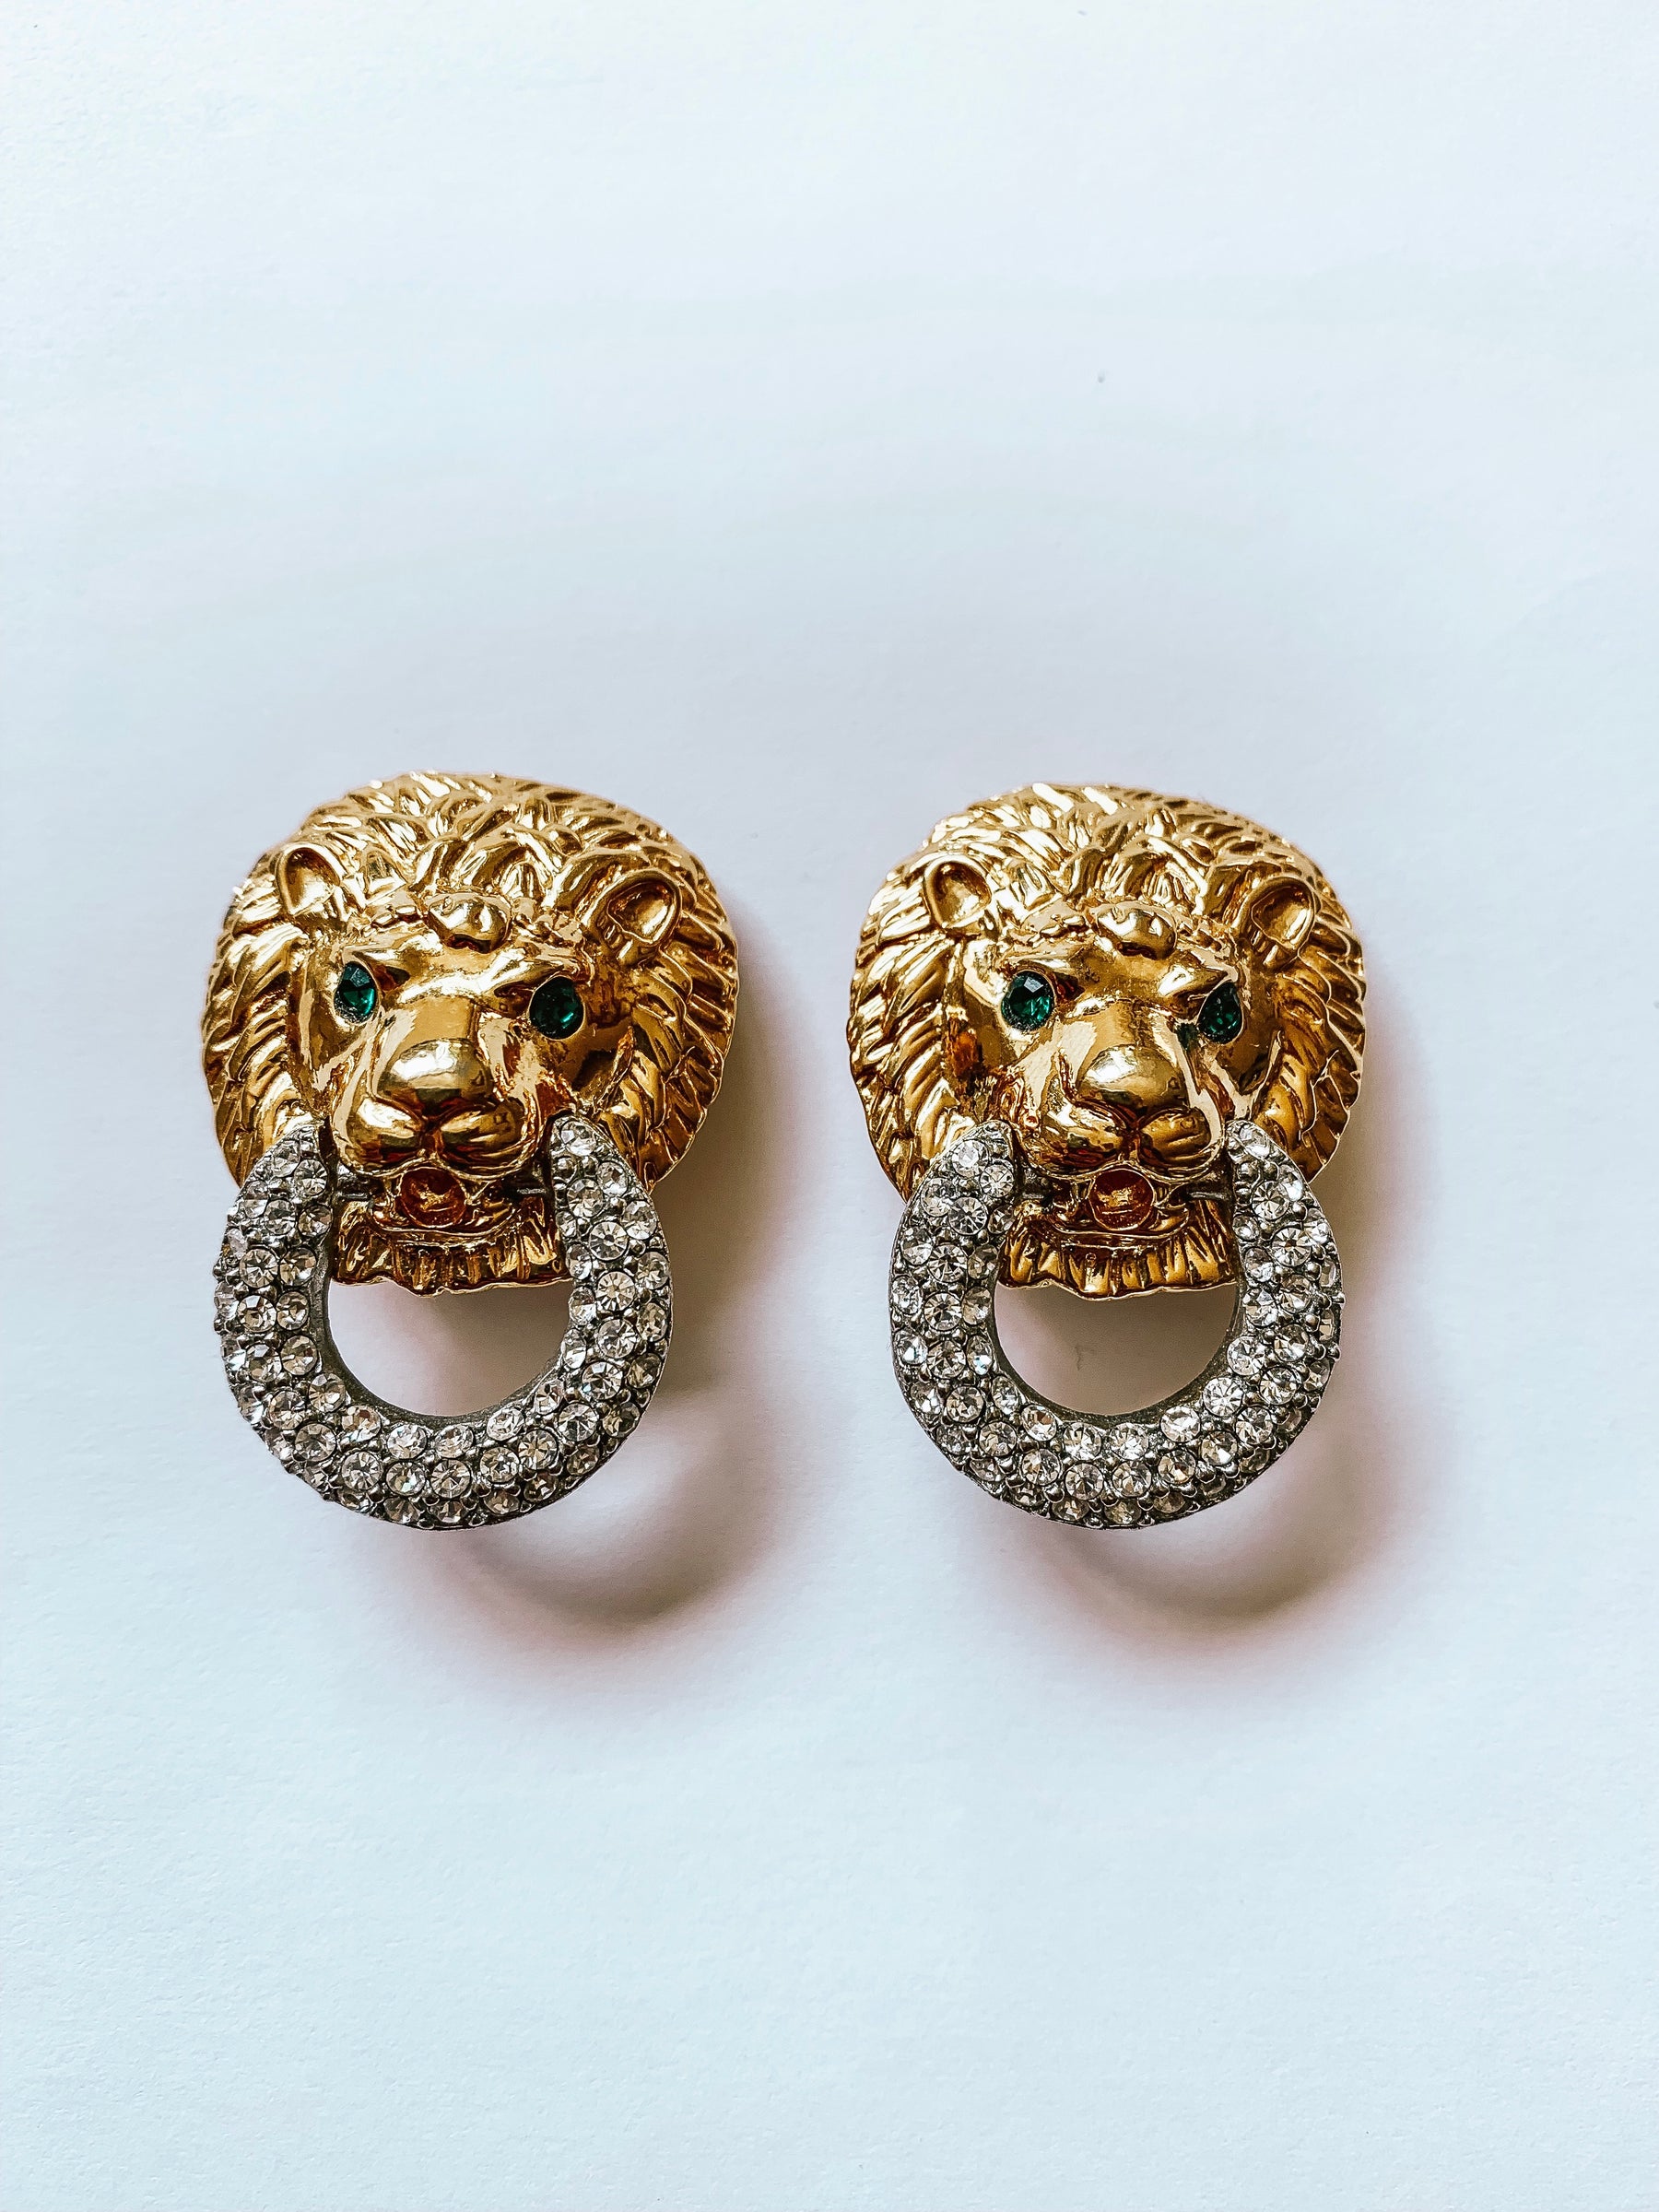 Vintage 1980's Kenneth Jay Lane Gold and Crystal Pave Lion's Head Earrings